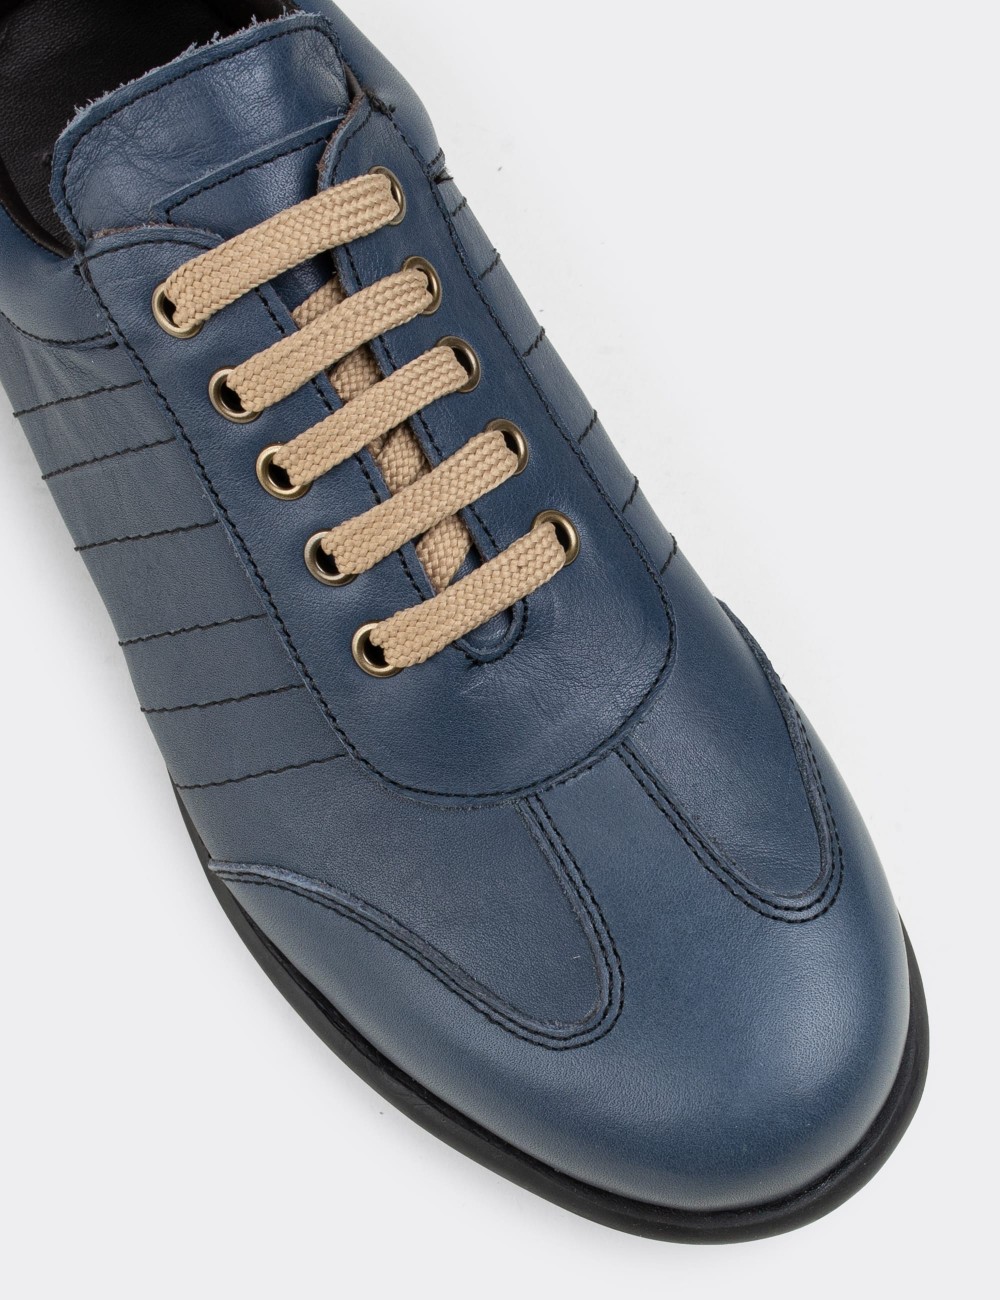 Blue  Leather Lace-up Shoes - 01826MMVIC03